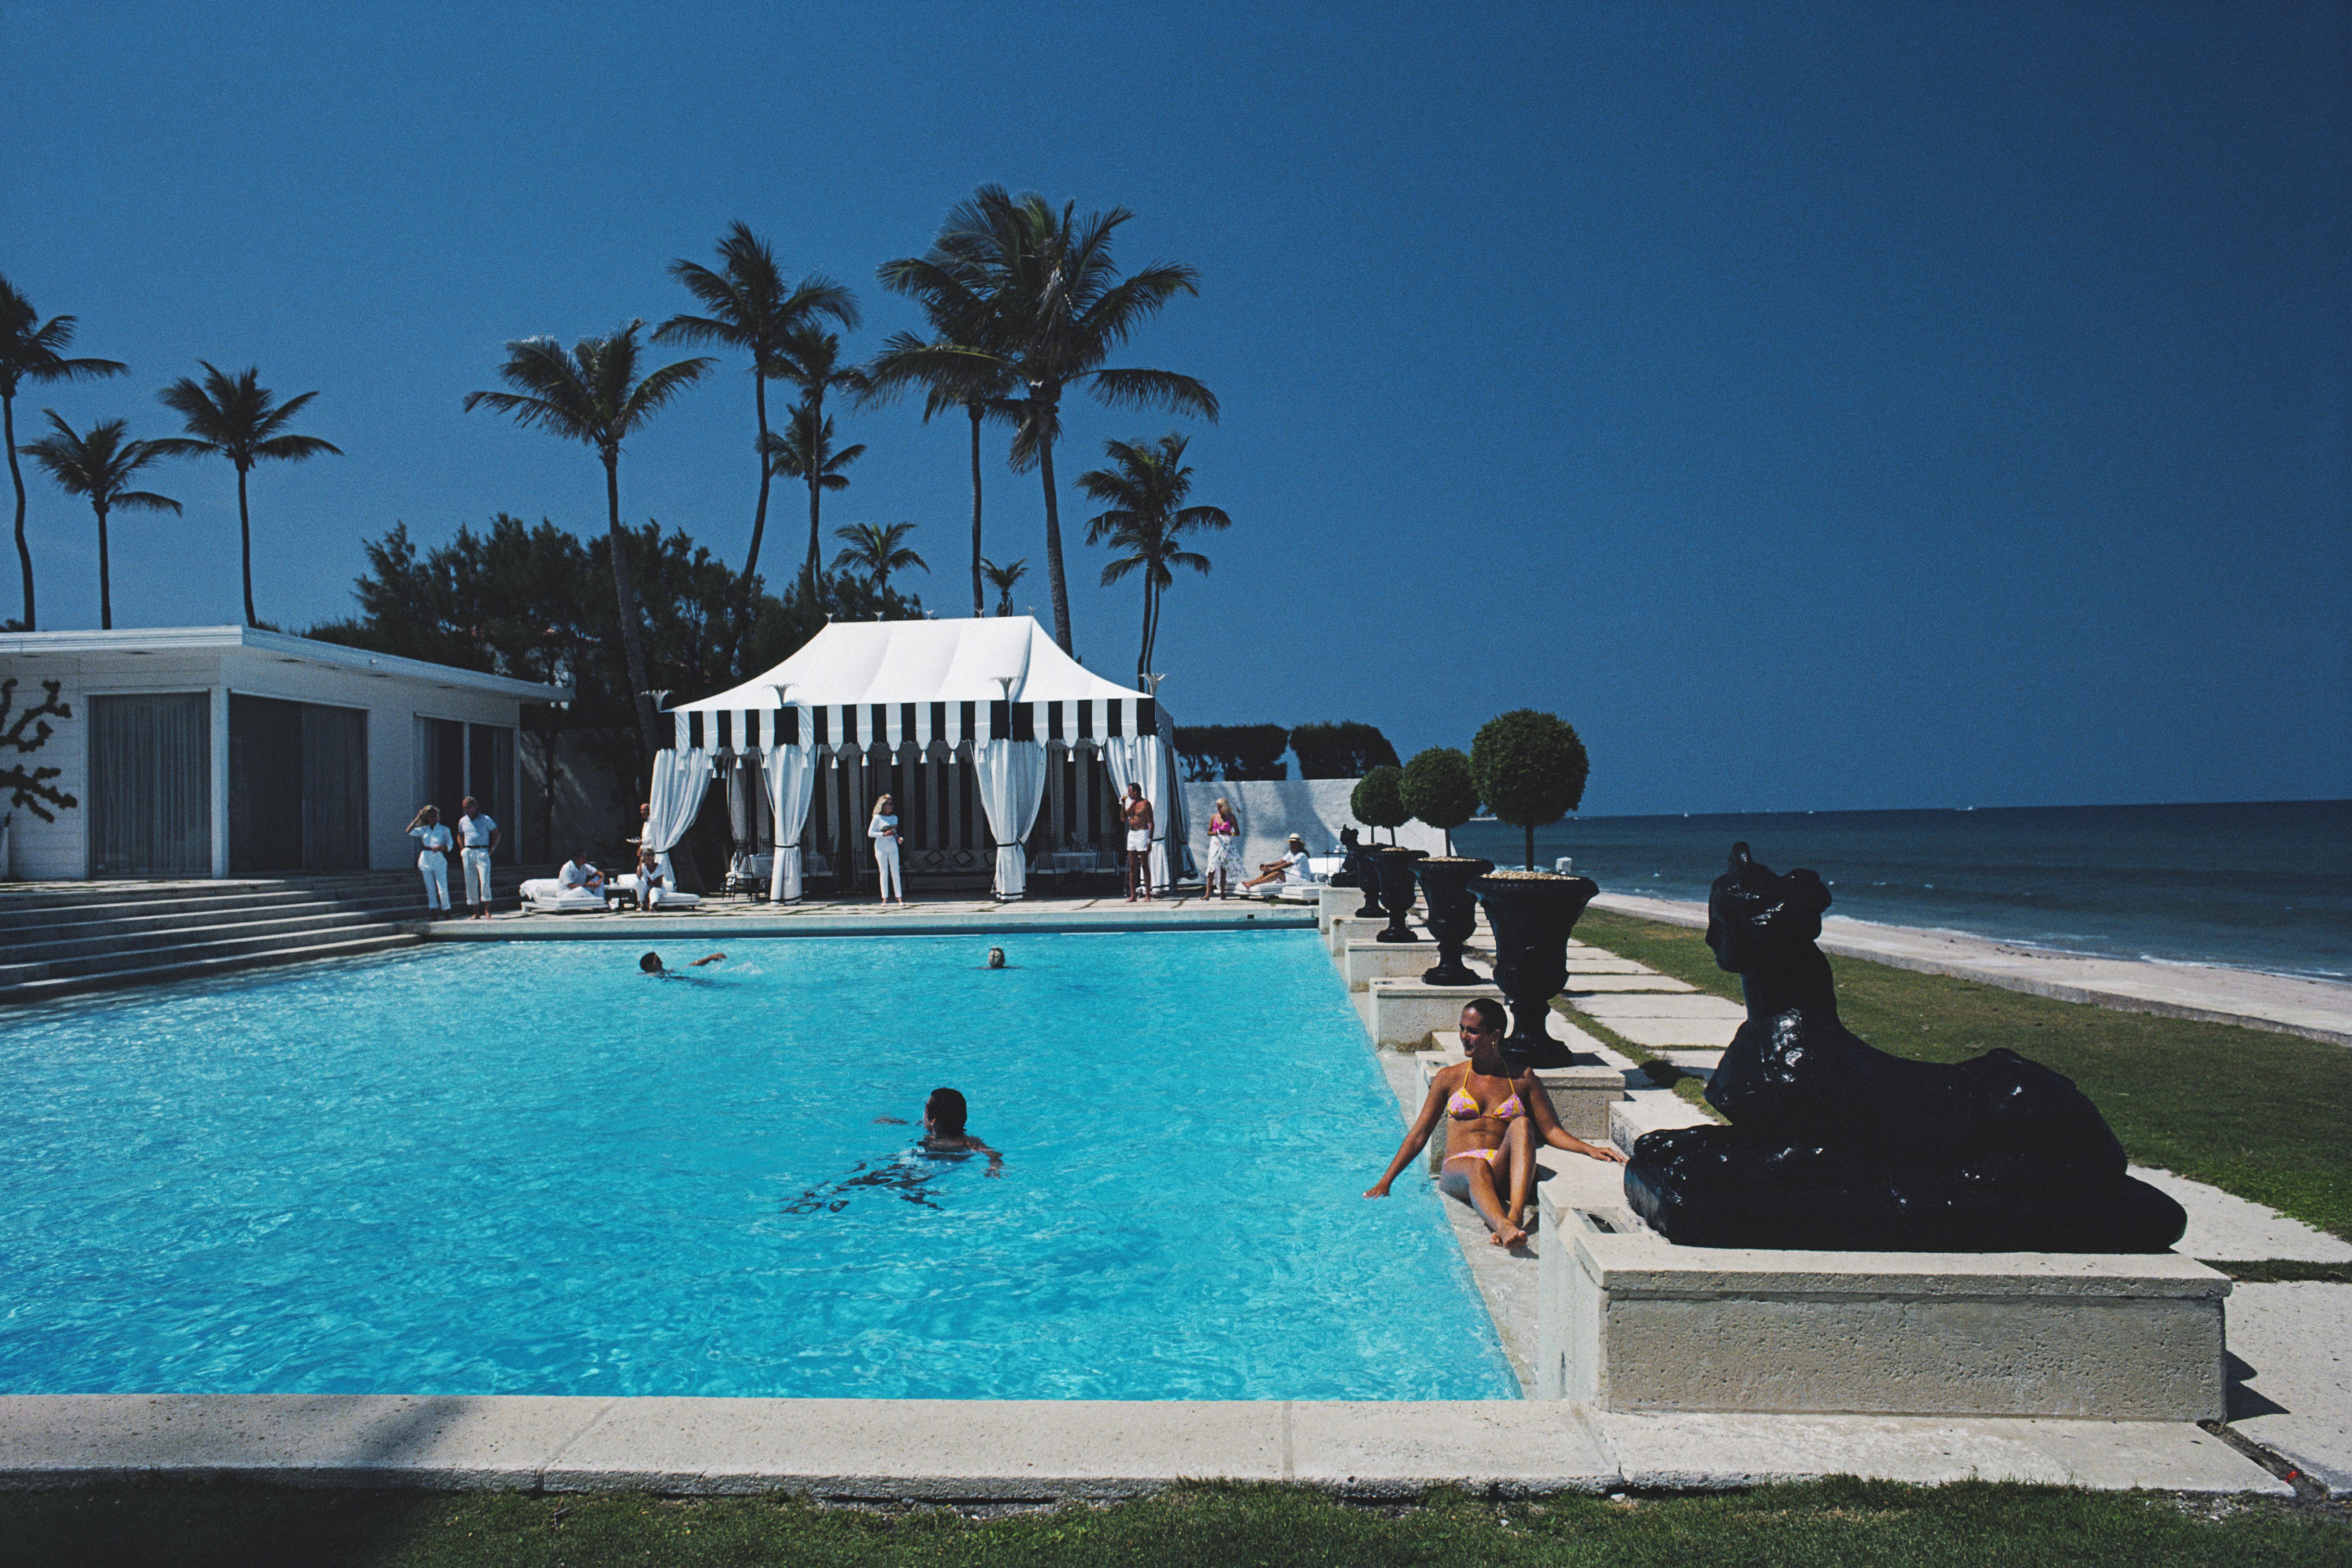 'Molly Wilmot's Pool' 1982 Slim Aarons Limited Estate Edition Print 

Guests relaxing around the pool at the home of Molly Wilmot, Palm Beach, Florida, April 1982. 
(Photo by Slim Aarons/Getty Images)

Produced from the original